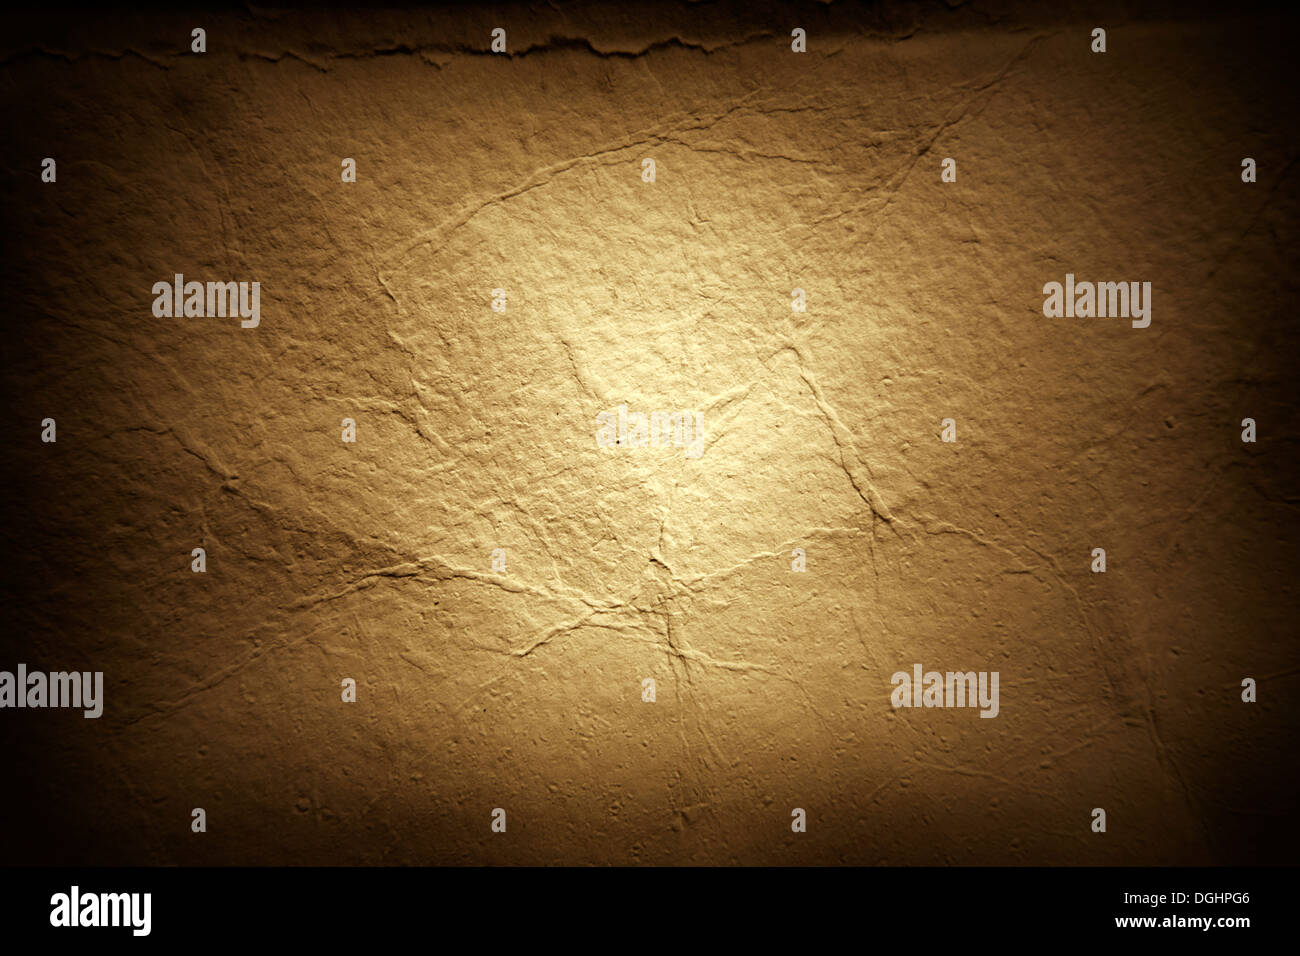 Brown grunge paper texture background Stock Photo